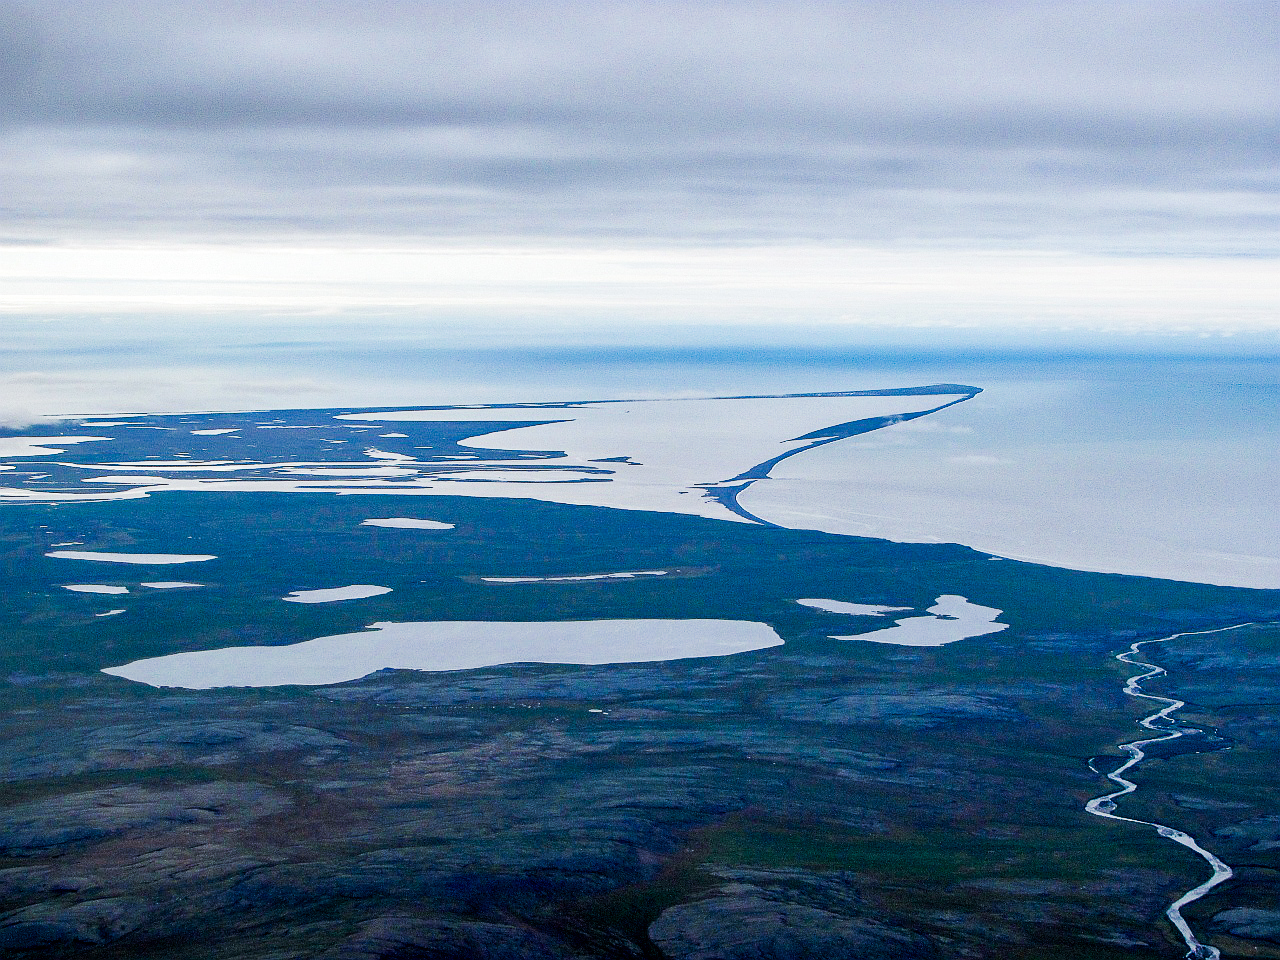 The pristine Arctic landscape of Point Hope, Alaska. Image Credit: Wiki Commons, Palm_AK, CC by 3.0.